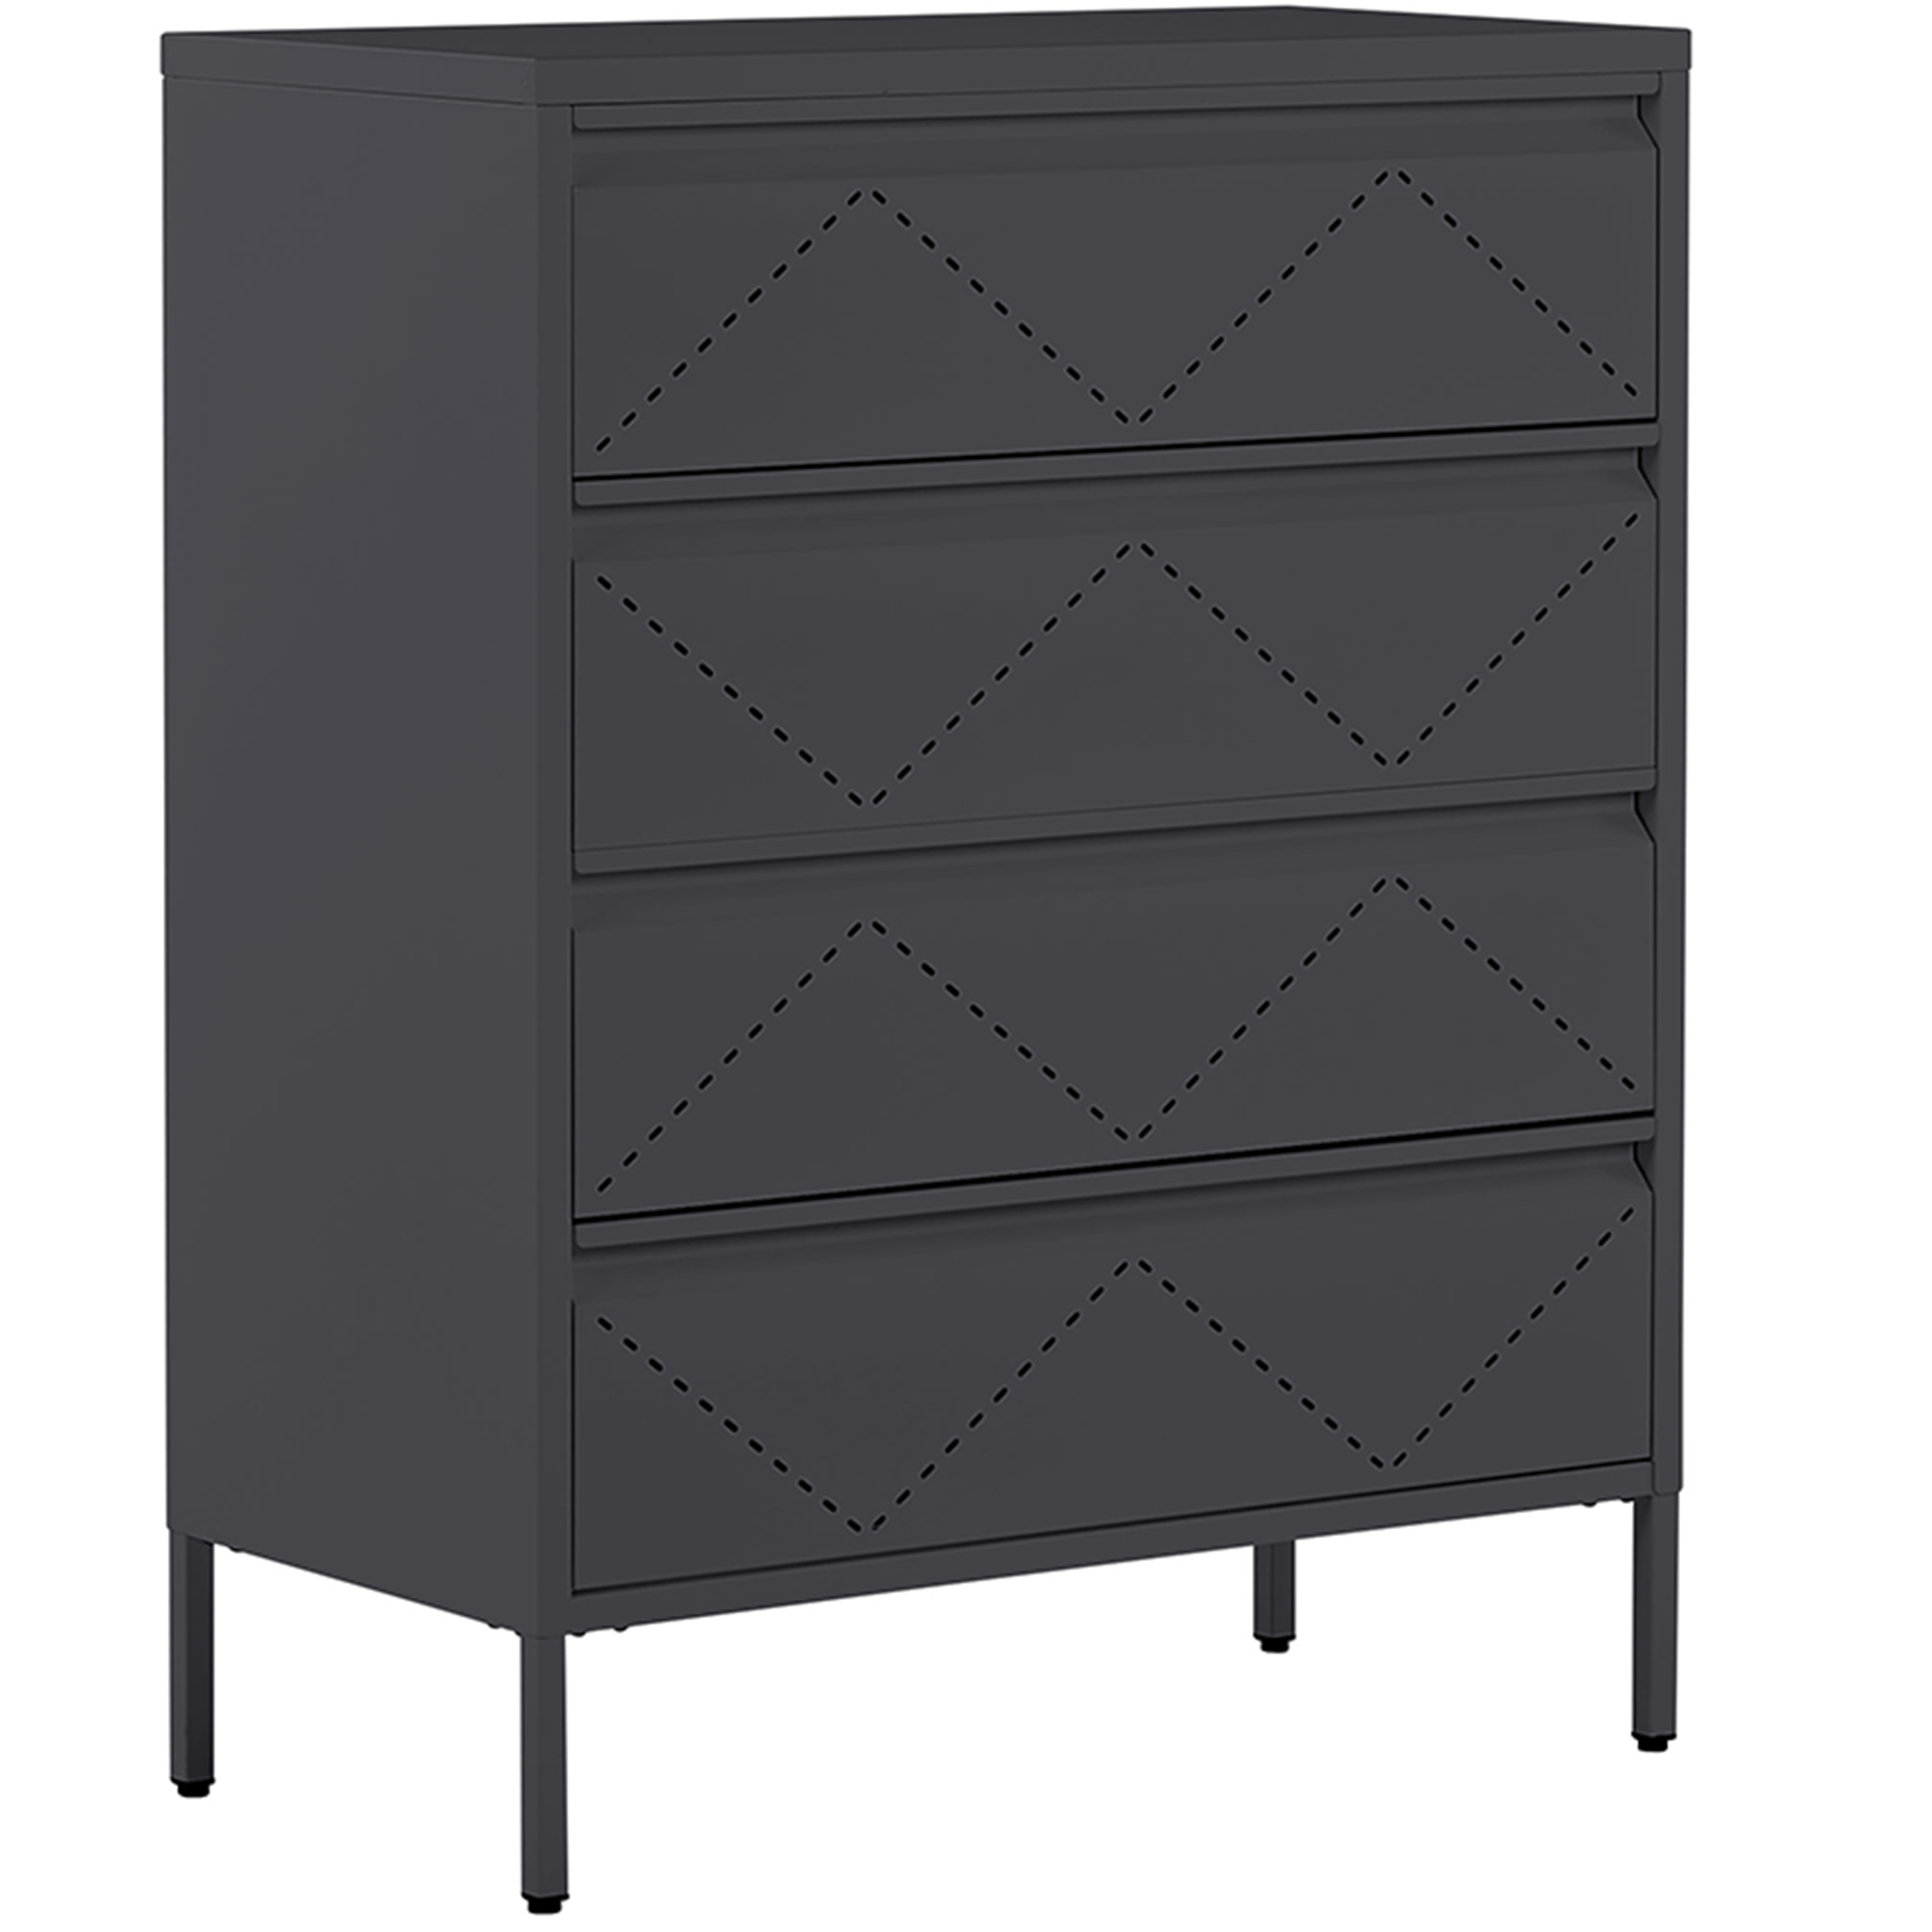 Beliani 4 Drawer Chest Black Metal Steel Storage Cabinet Industrial Style for Office Living Room Material:Steel Size:40x102x80